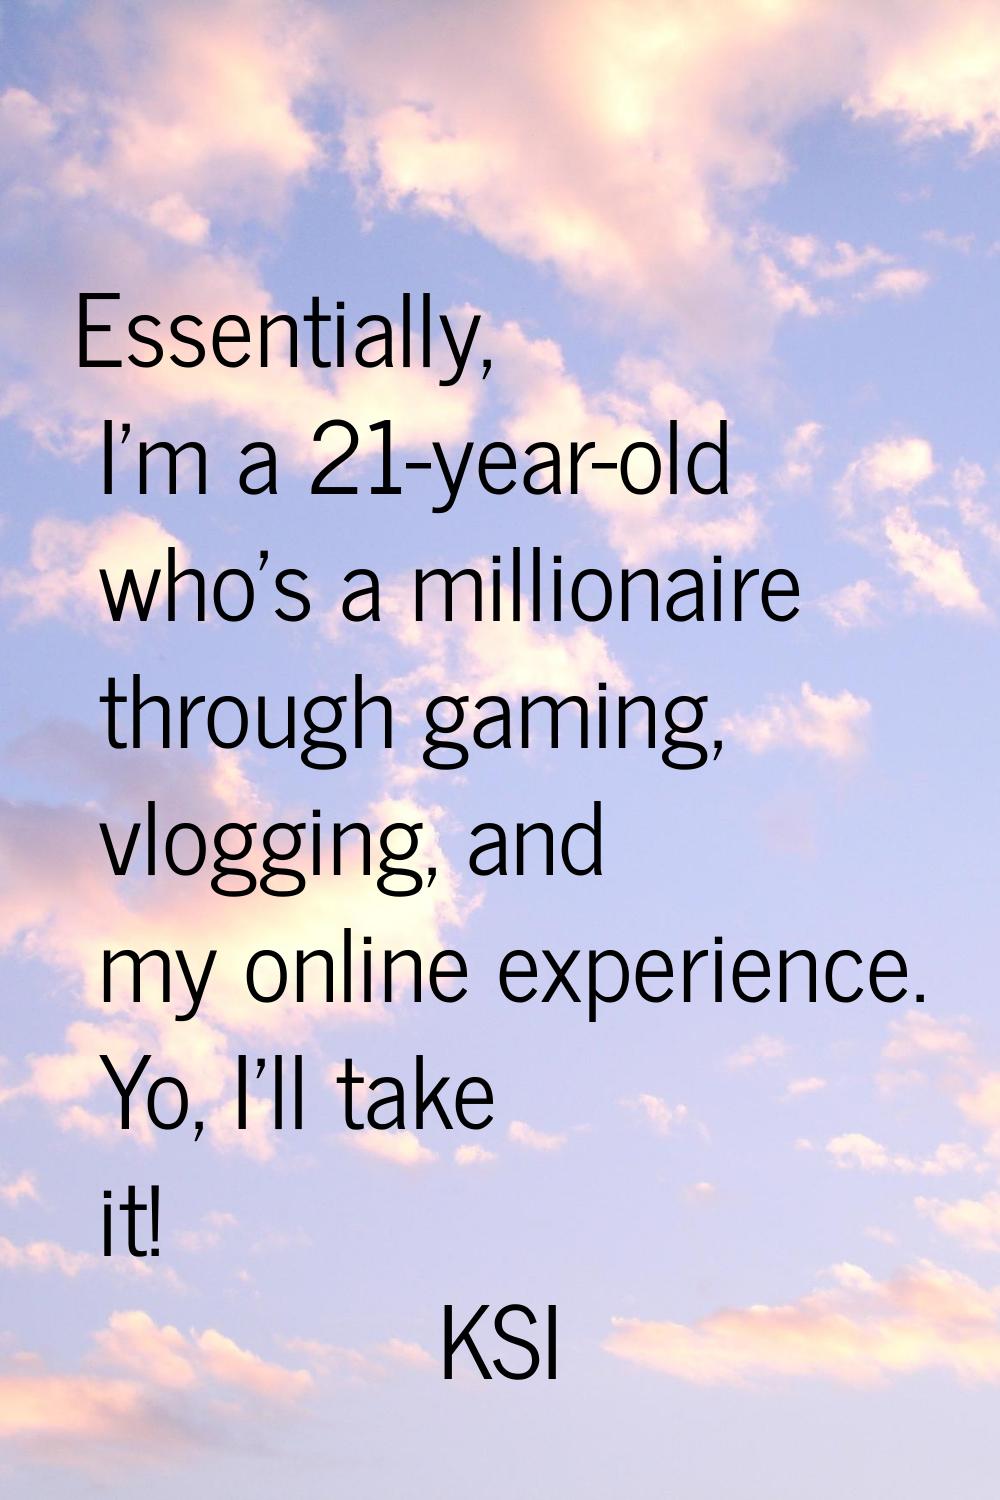 Essentially, I'm a 21-year-old who's a millionaire through gaming, vlogging, and my online experien